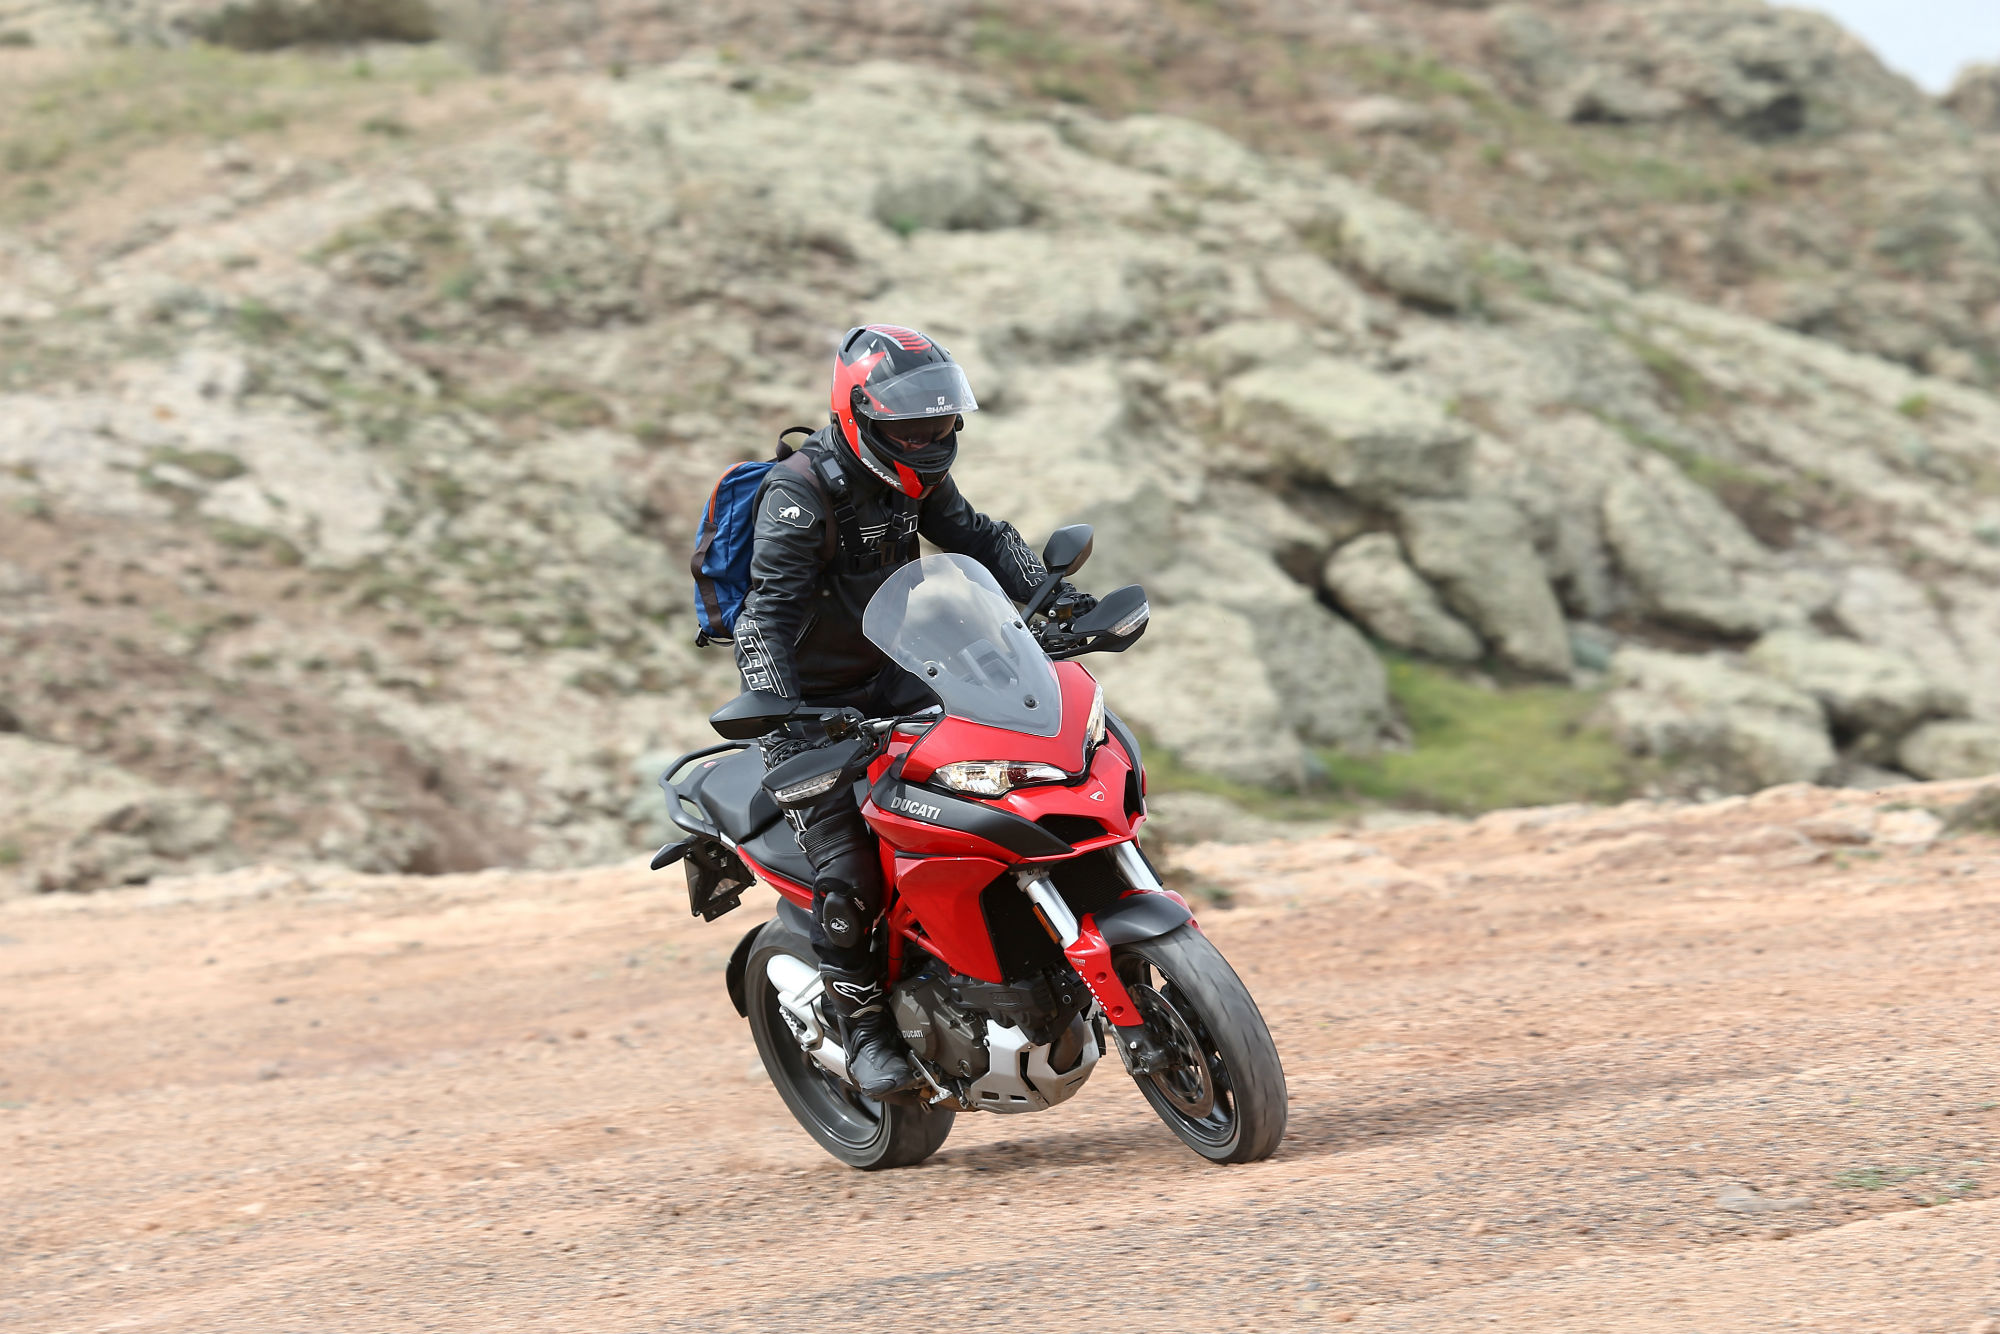 First ride: Ducati Multistrada 1200 and 1200 S review